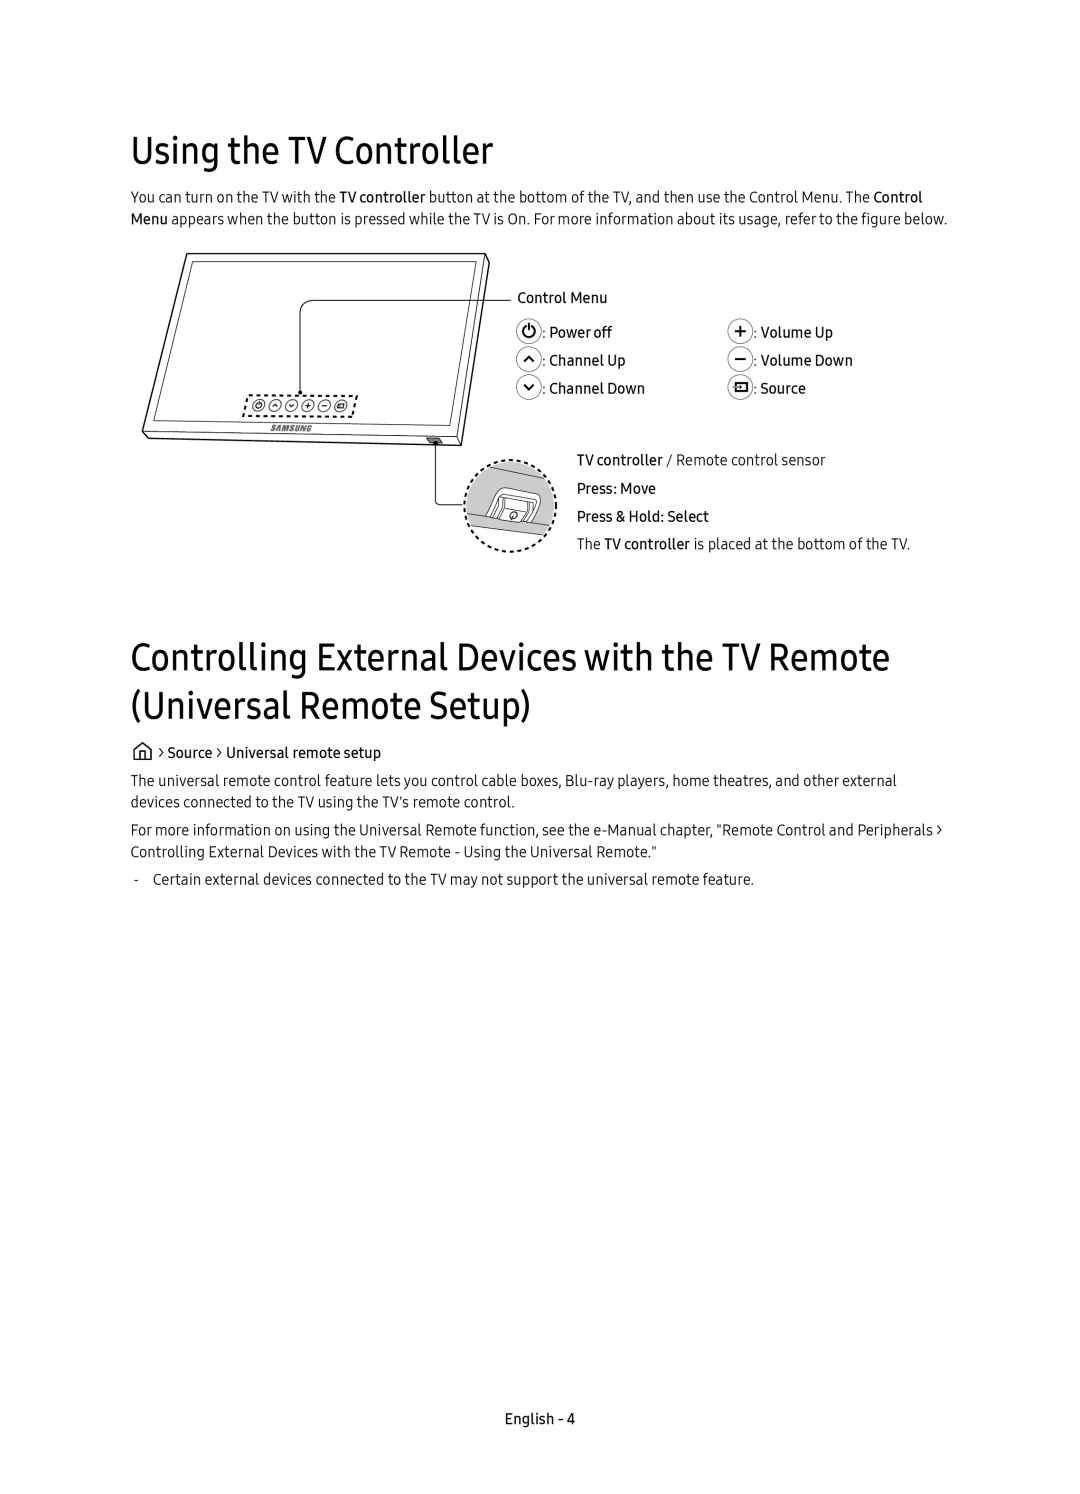 Samsung UE49KU6510UXZT manual Using the TV Controller, Control Menu, Power off, Volume Up, Channel Up, Channel Down, Source 